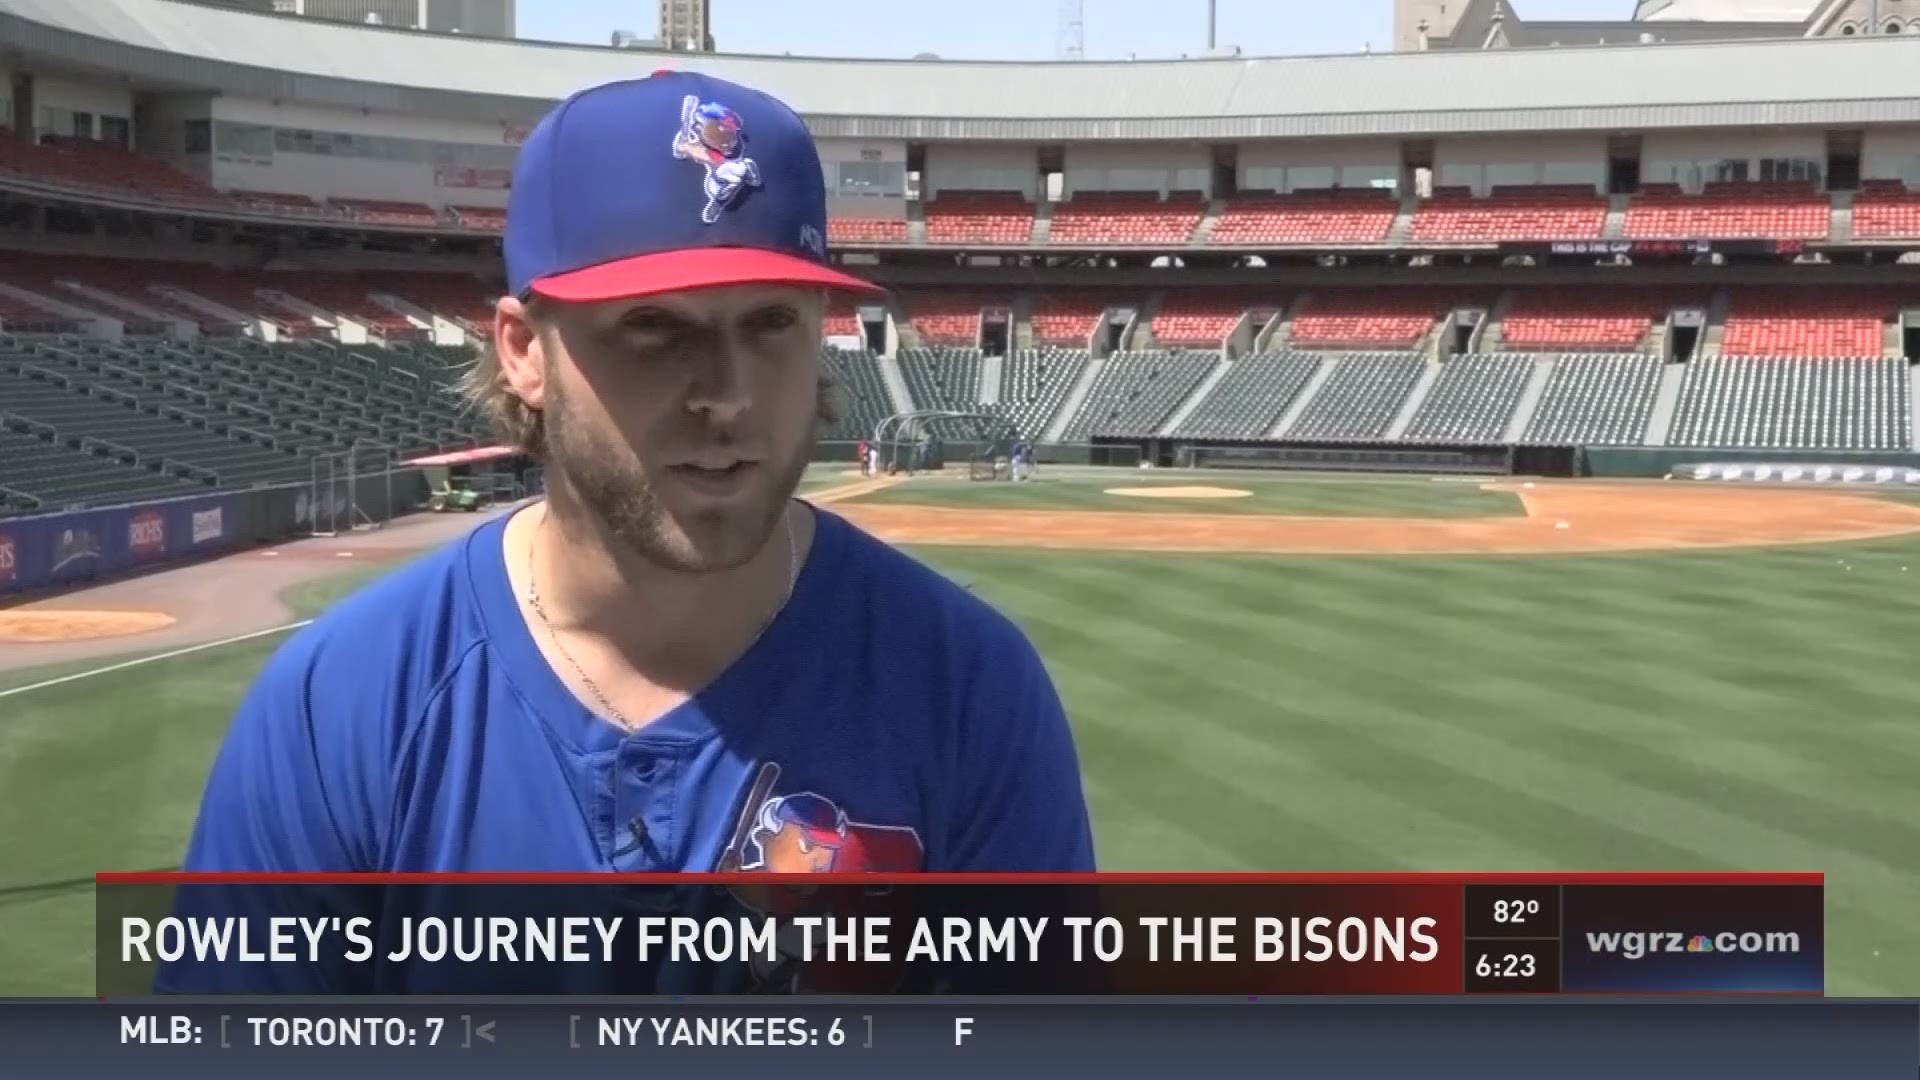 Chris Rowley's journey from the Army to the Bisons